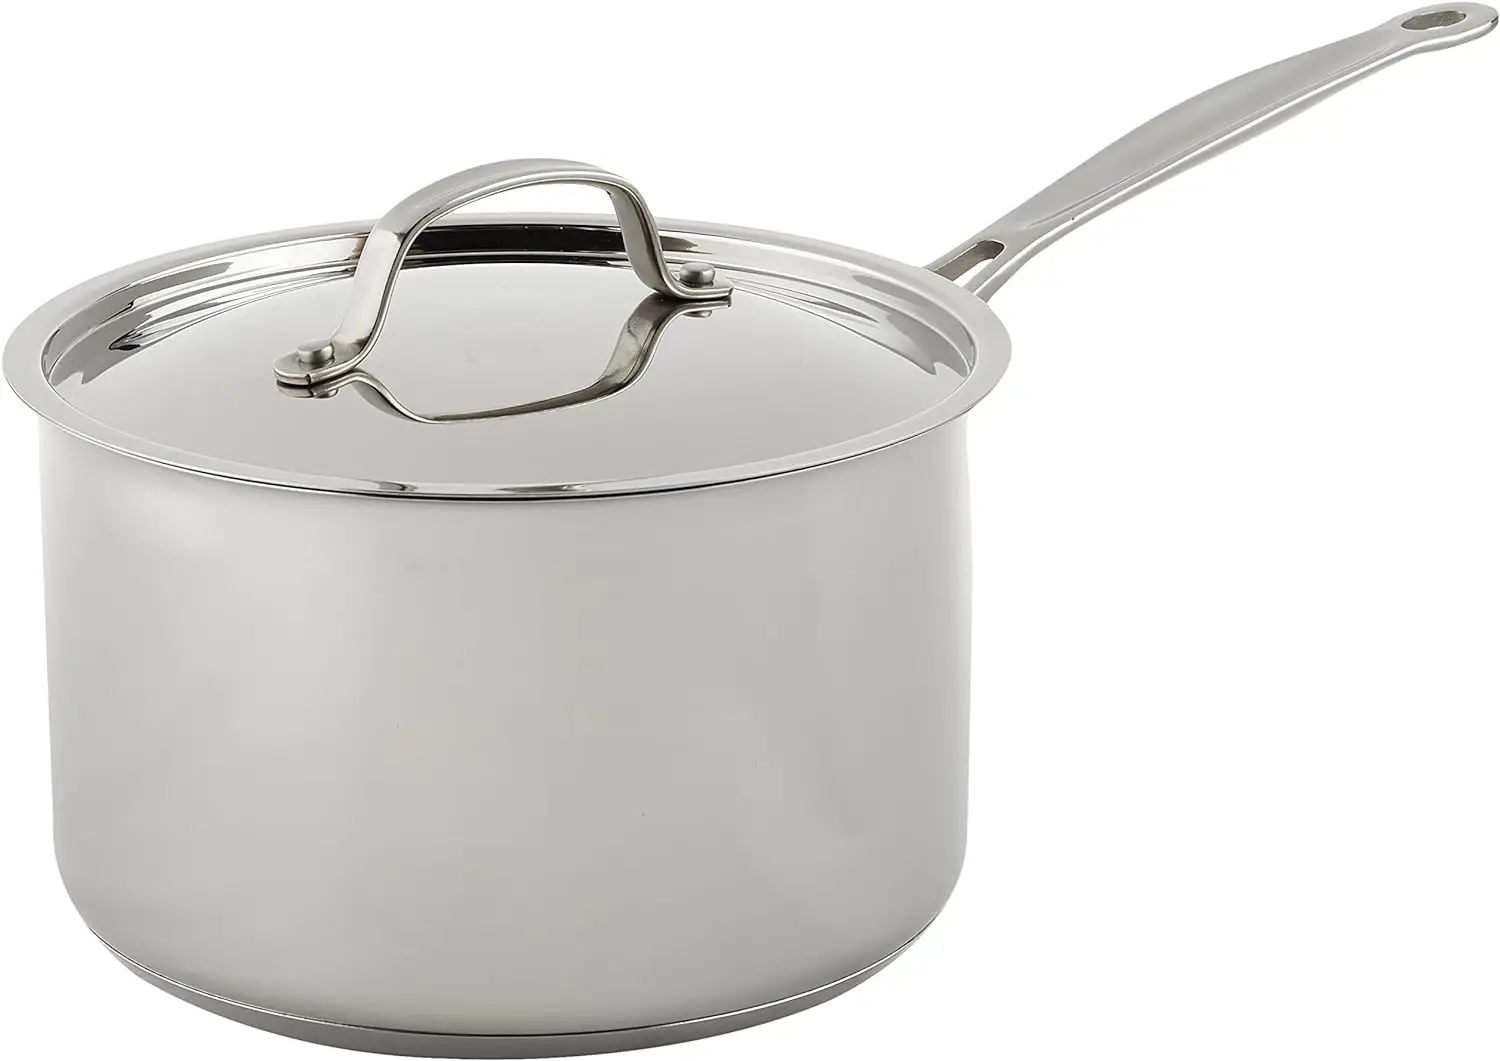 

Chef's Classic Stainless 4-Quart Saucepan with Cover Cooking accessories Cooking glass pot 냄비 Aluminium pan Big cooking pot